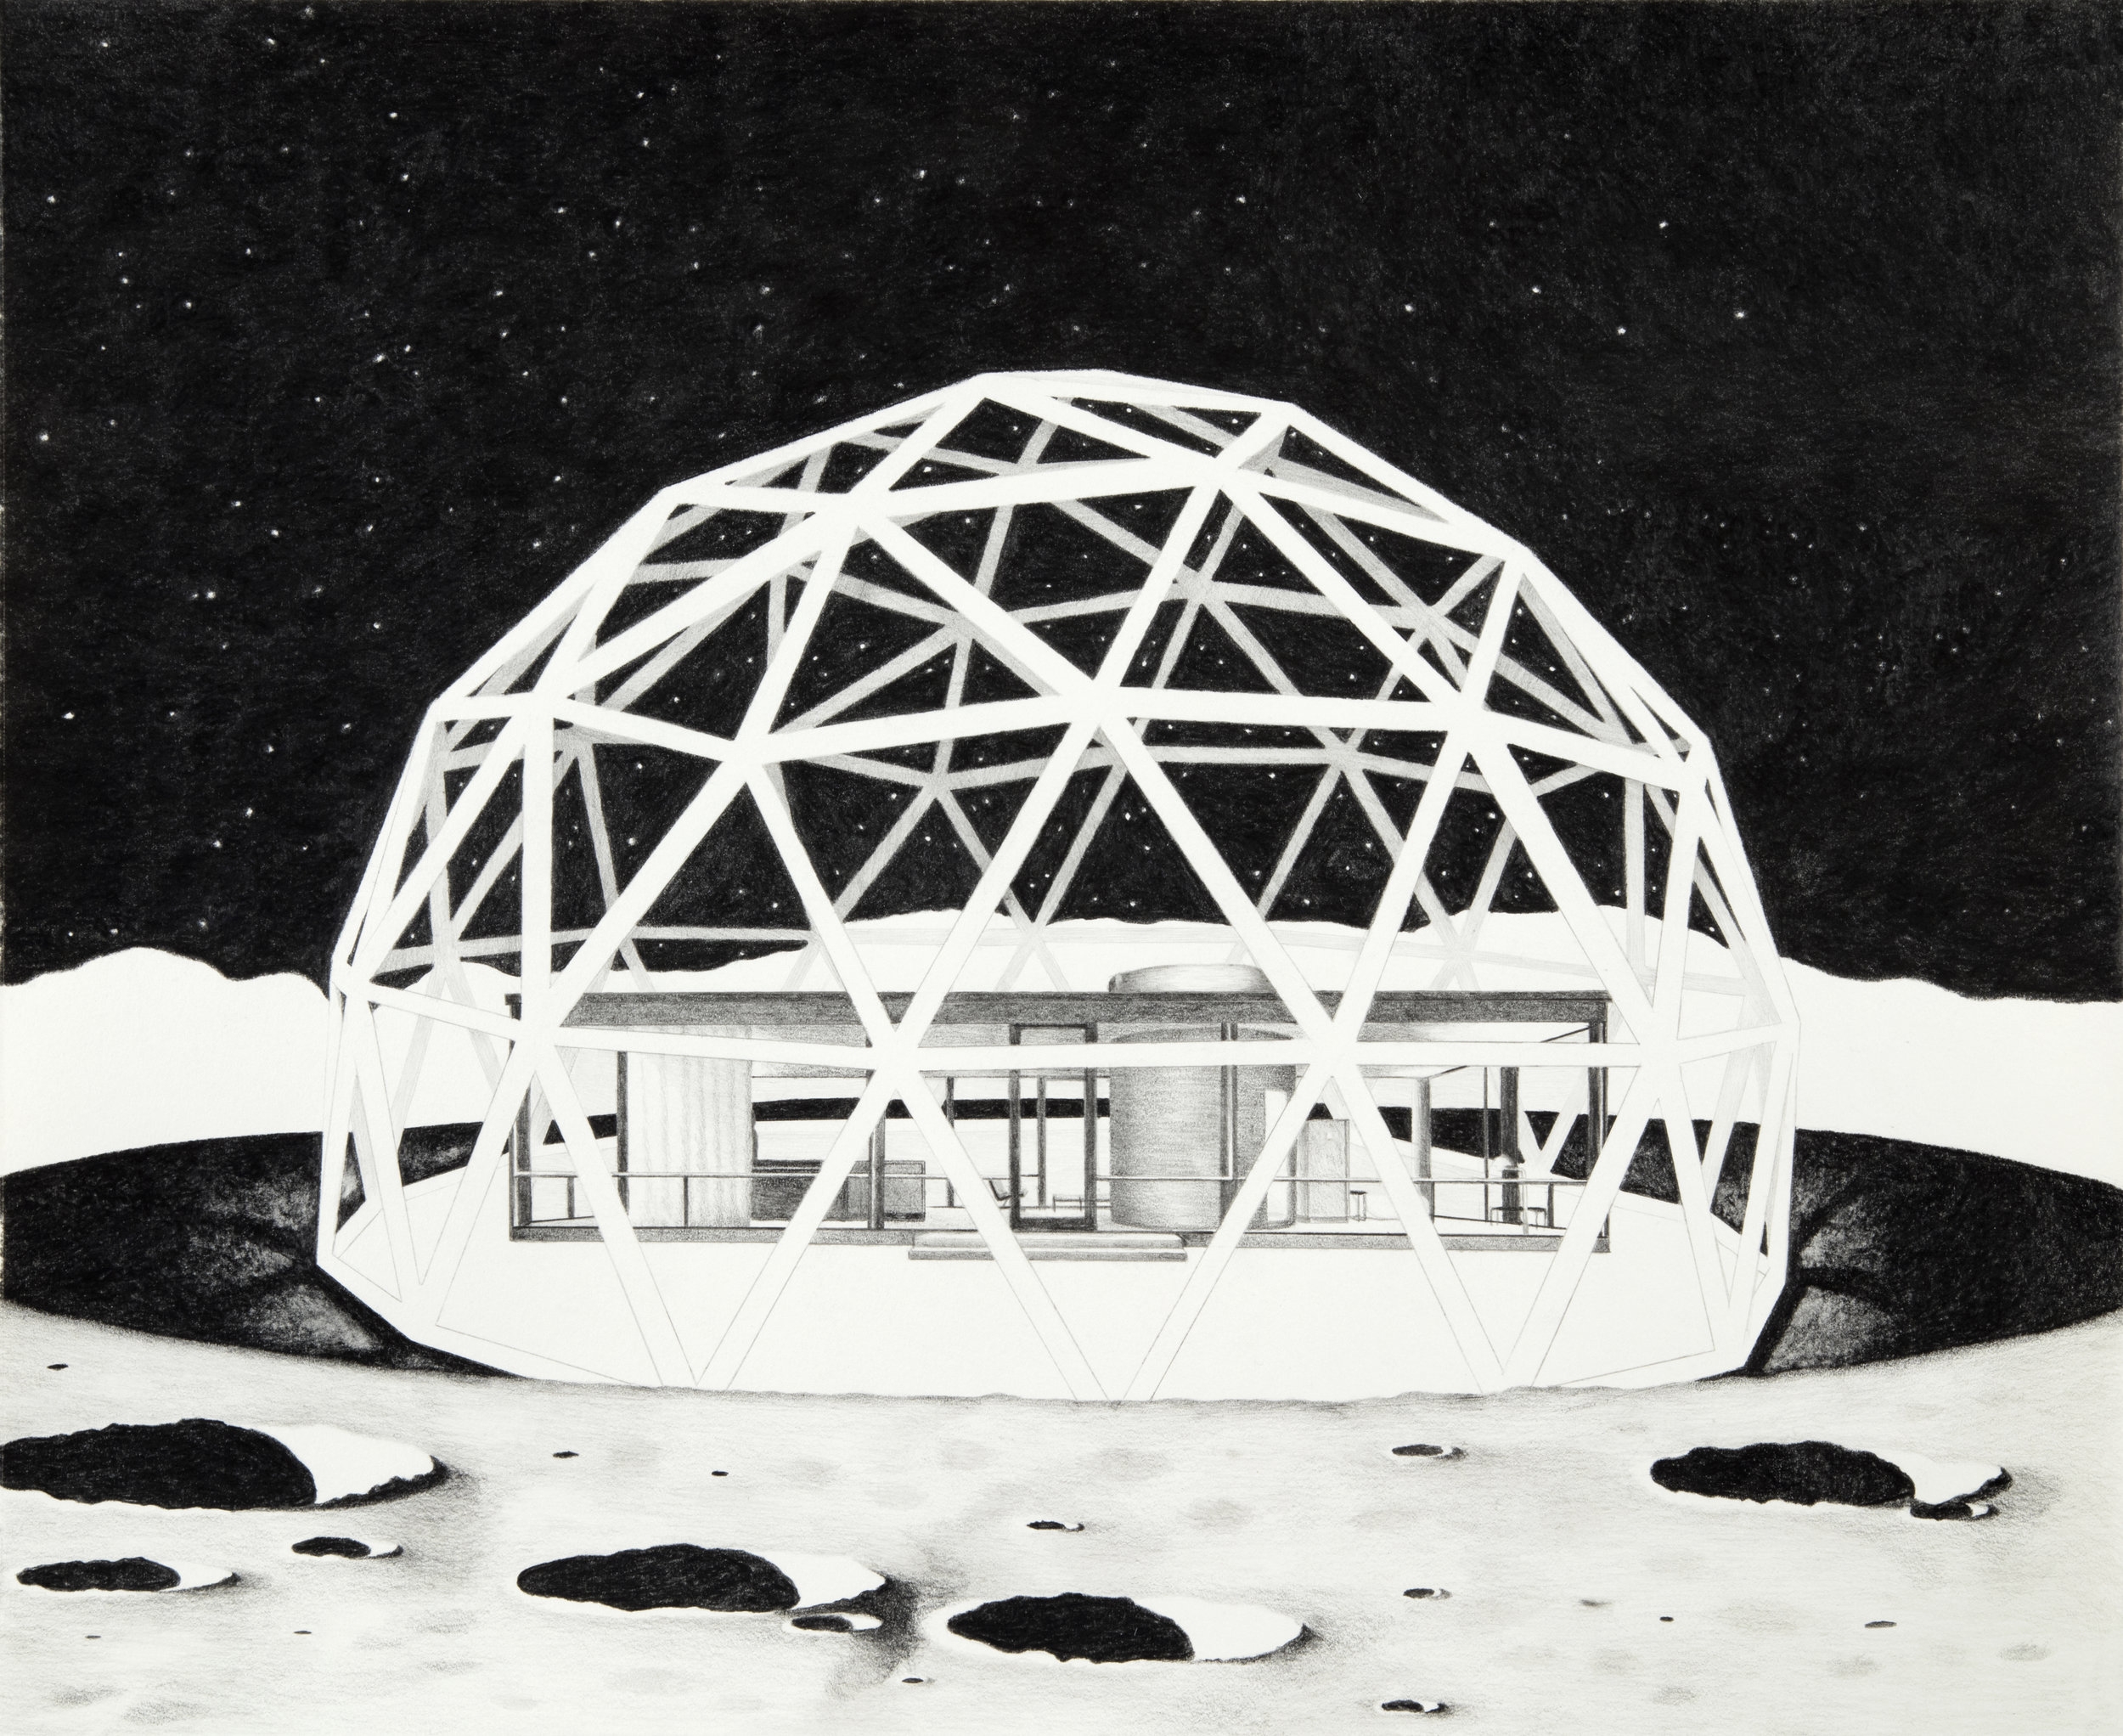 Proposition 1: Moon Museum of Architecture featuring The Glass House by Philip Johnson, 2017.